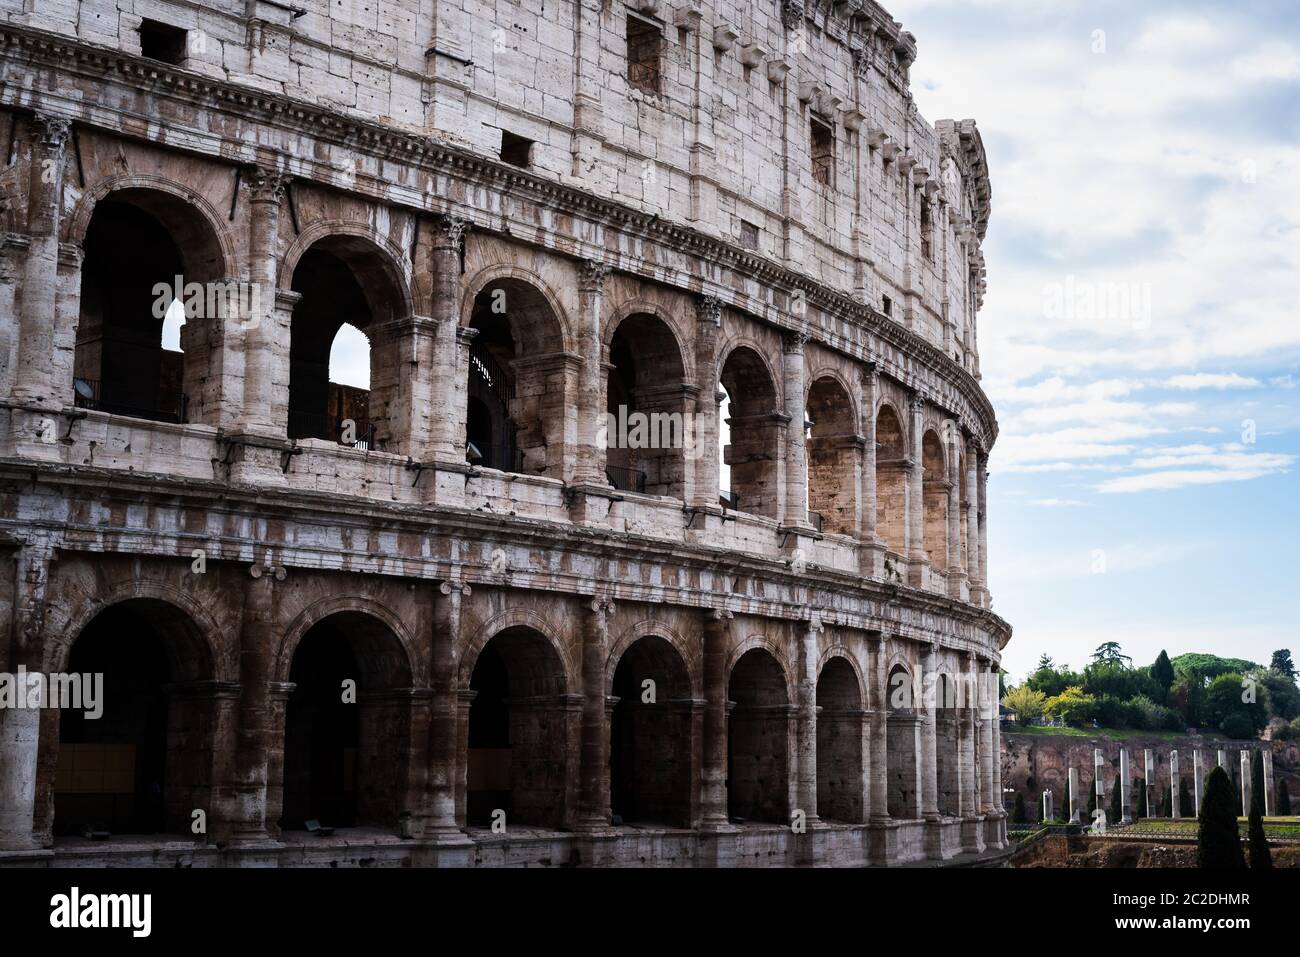 The huge and mythical Colosseum in Rome, Italy Stock Photo